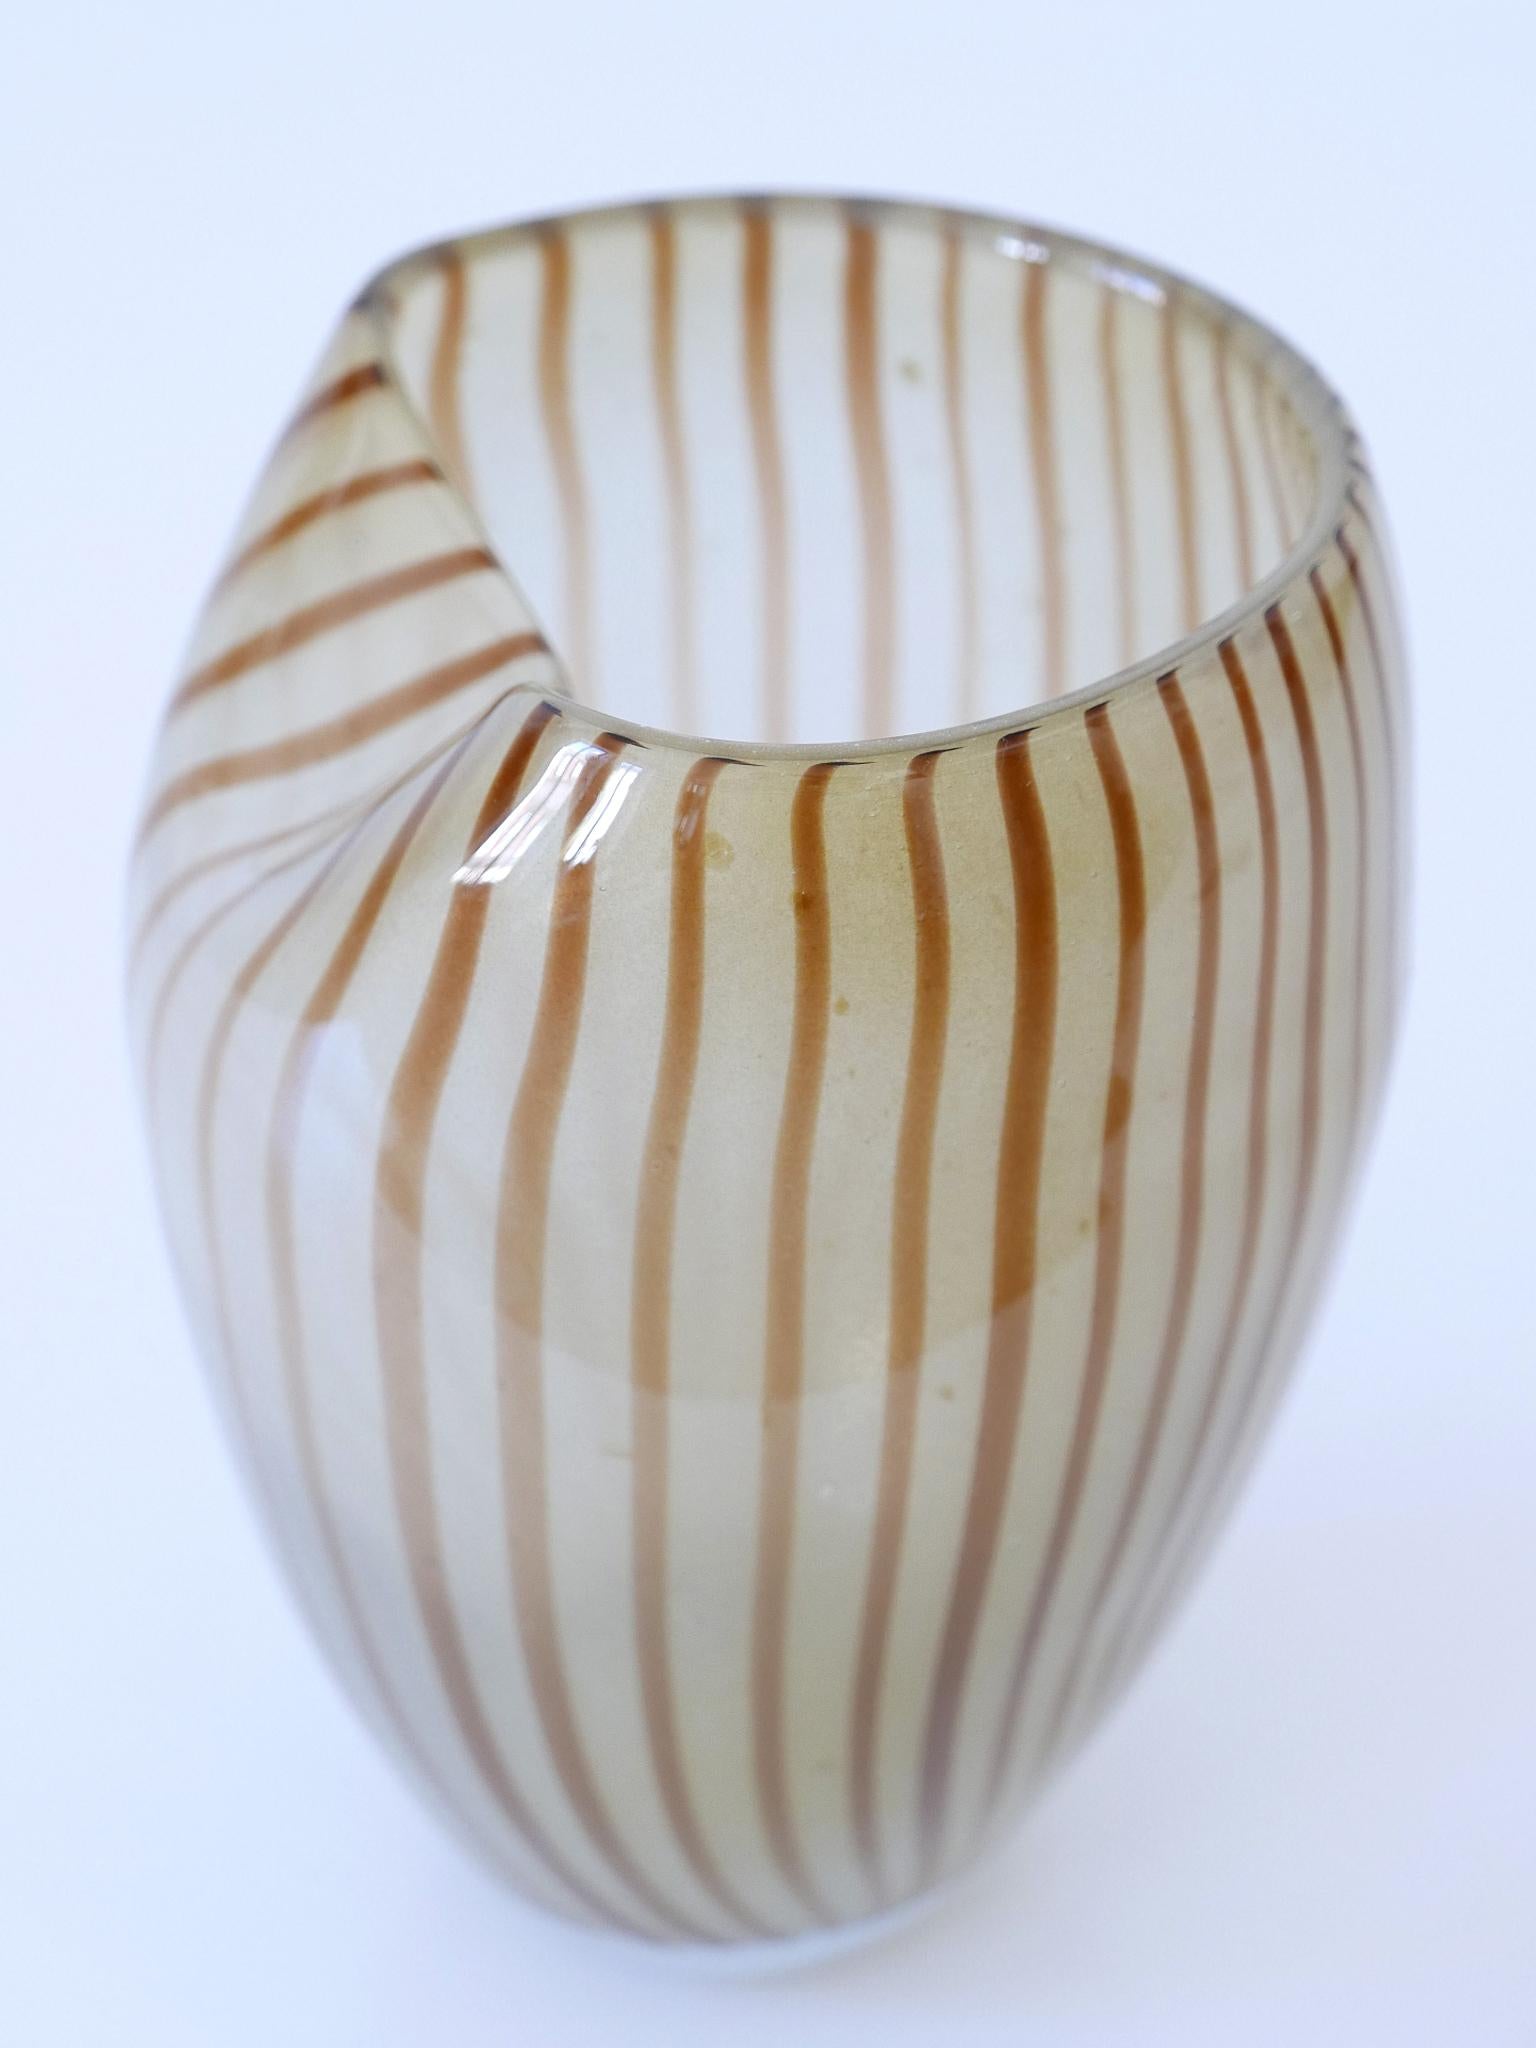 Decorative Mid Century Modern Murano Glass Vase Italy 1960s  For Sale 6